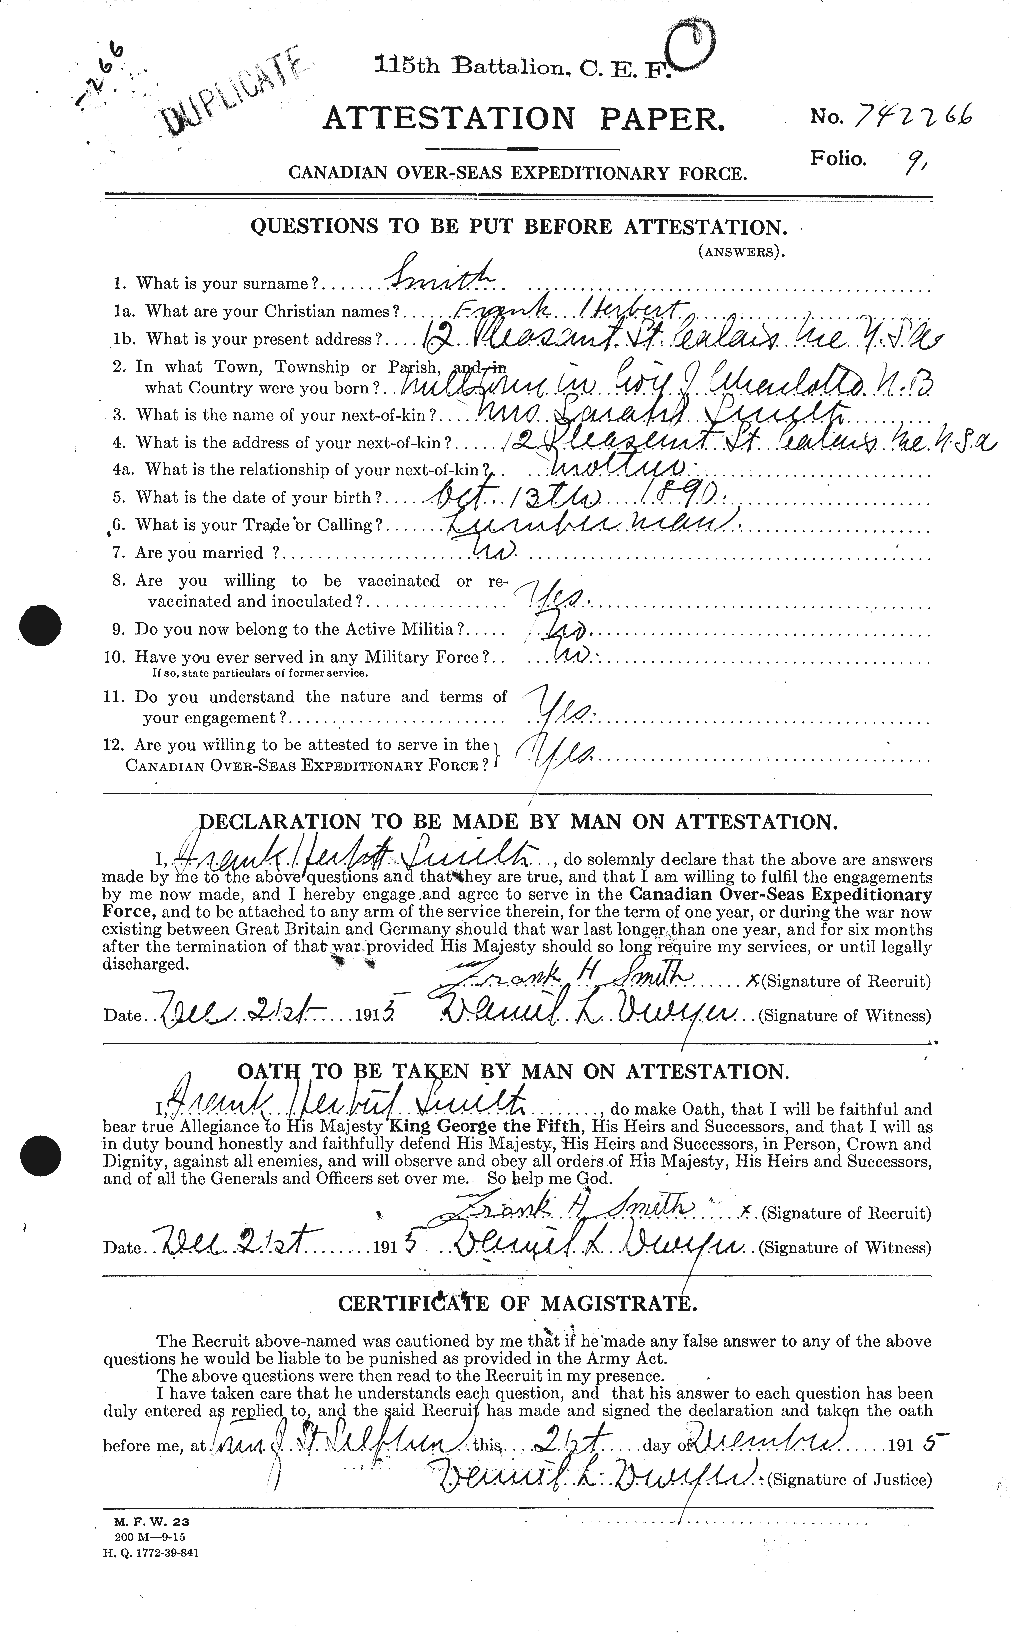 Personnel Records of the First World War - CEF 106763a